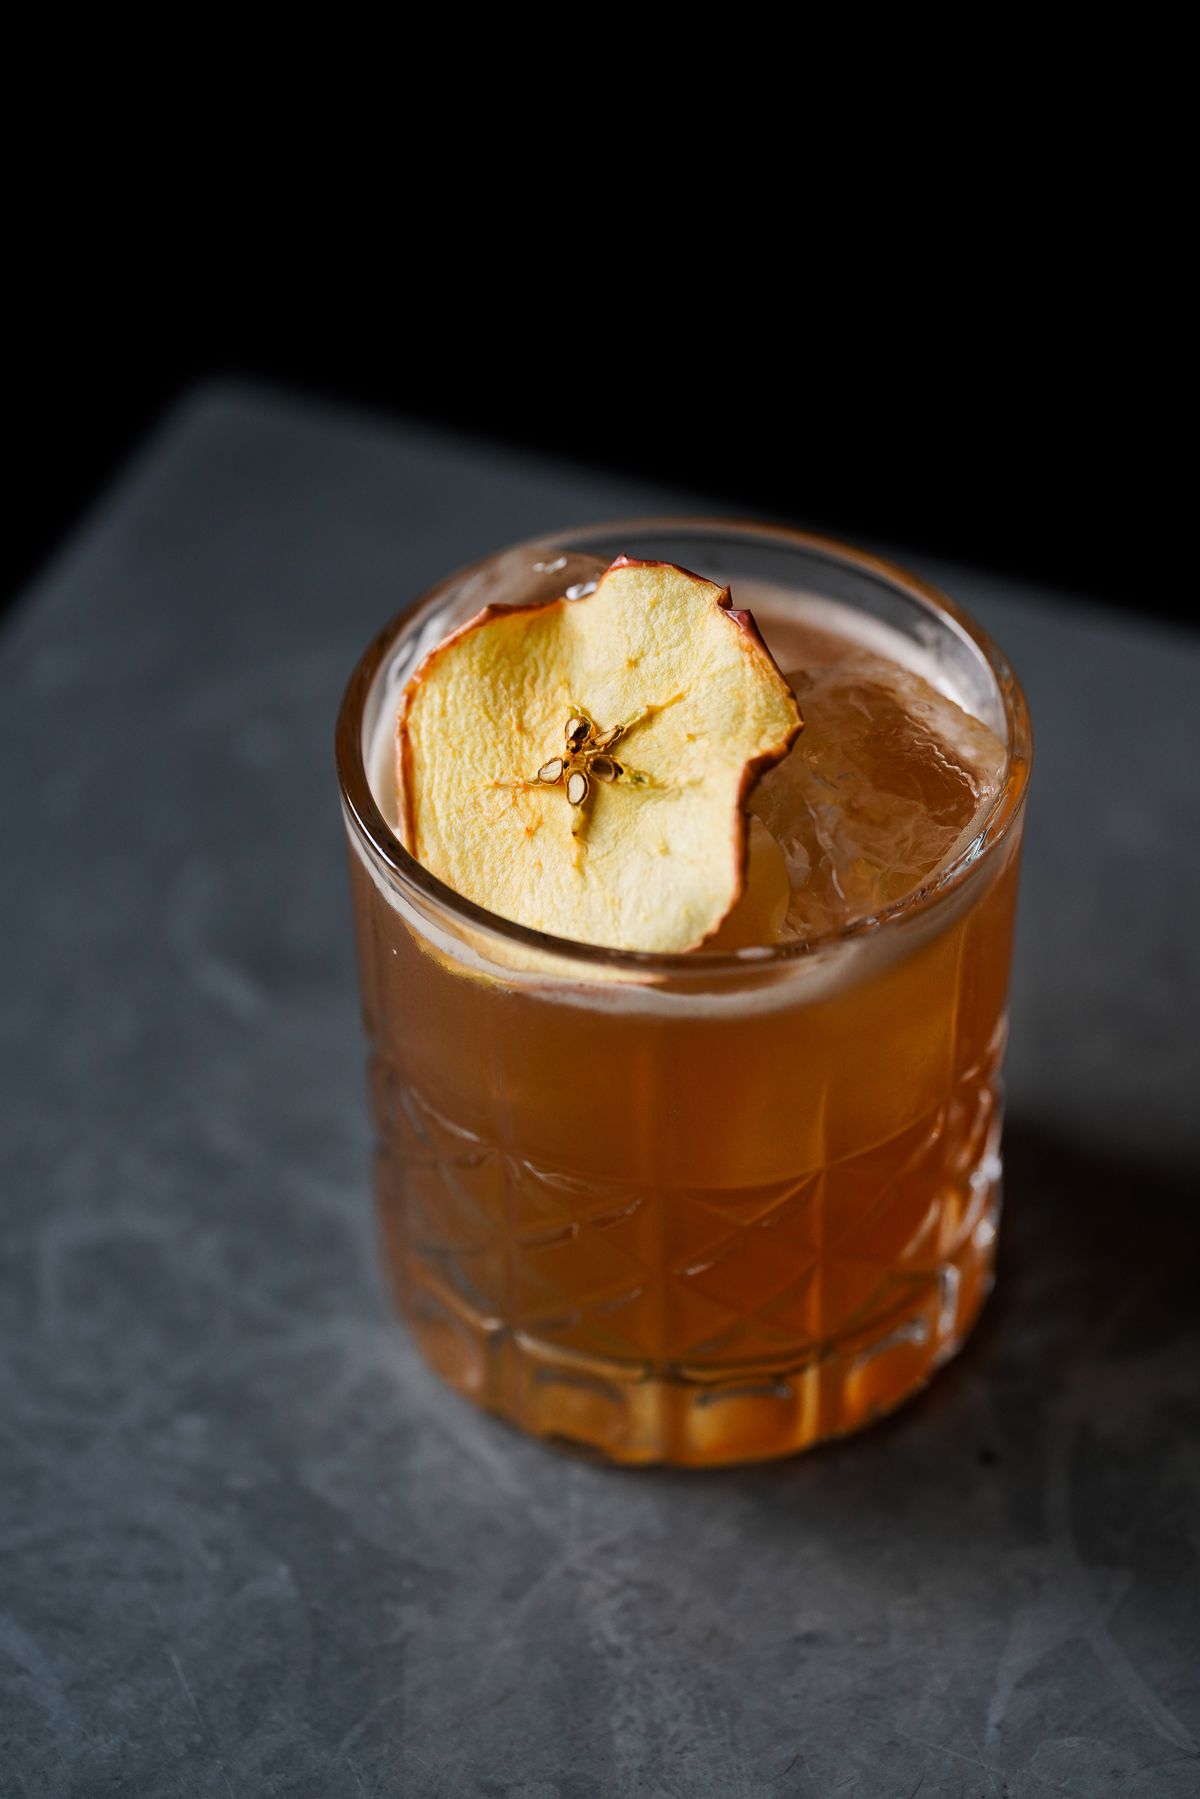 A light brown cocktail in a clear glass with a slice of dried pear.